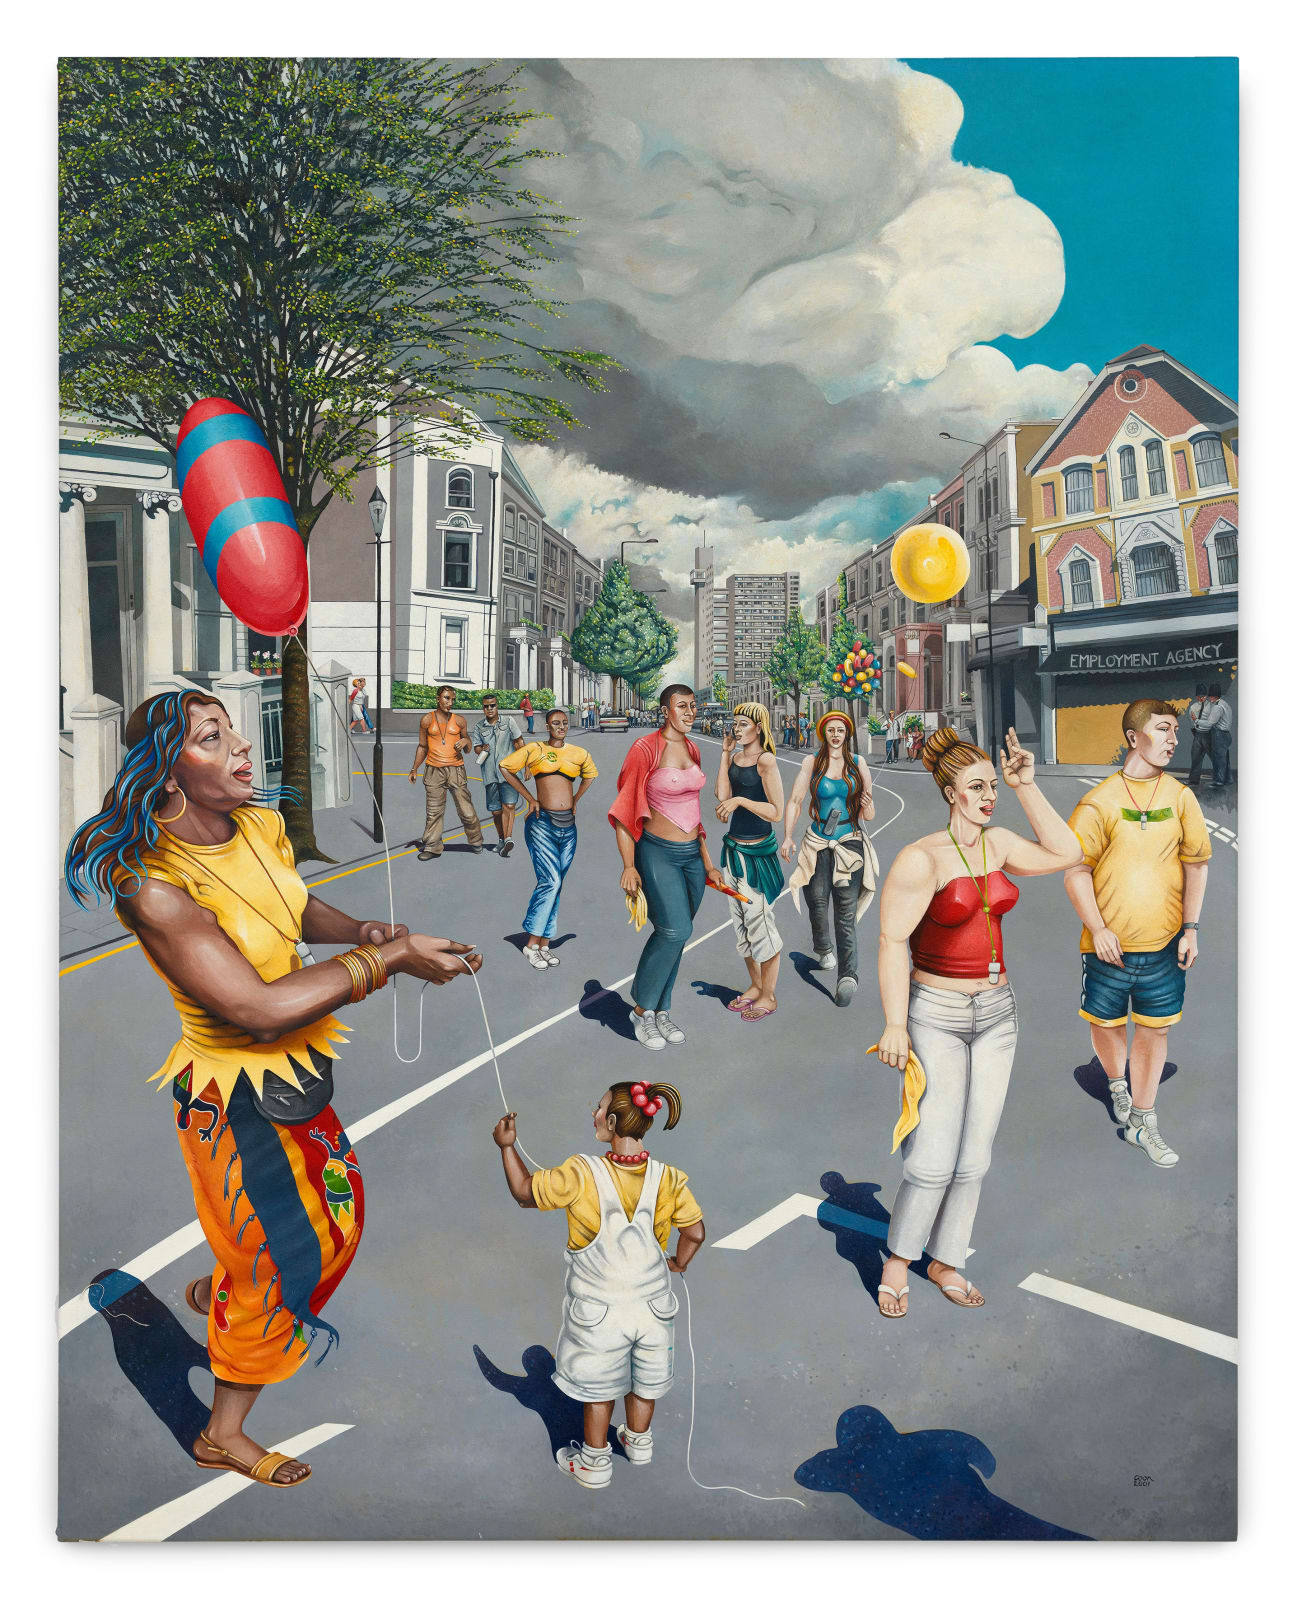 <div class="artist">Caroline Coon</div><div class="title_and_year"><span class="title">Carnival: Sunday Morning, August 26th 2000</span><span class="year">, 2001</span></div>